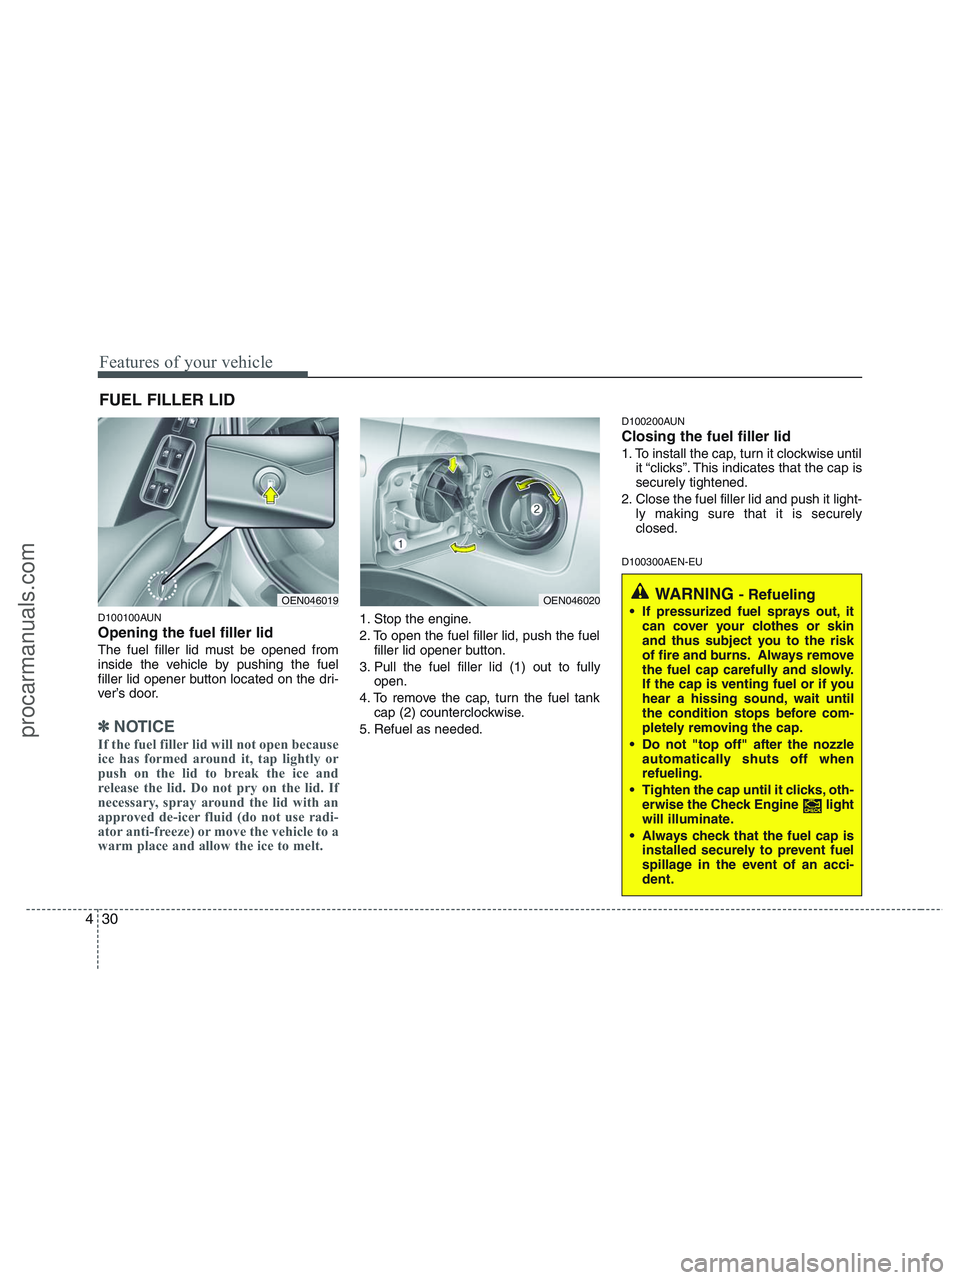 HYUNDAI VERACRUZ 2010  Owners Manual Features of your vehicle
30 4
D100100AUN
Opening the fuel filler lid
The fuel filler lid must be opened from
inside the vehicle by pushing the fuel
filler lid opener button located on the dri-
ver’s